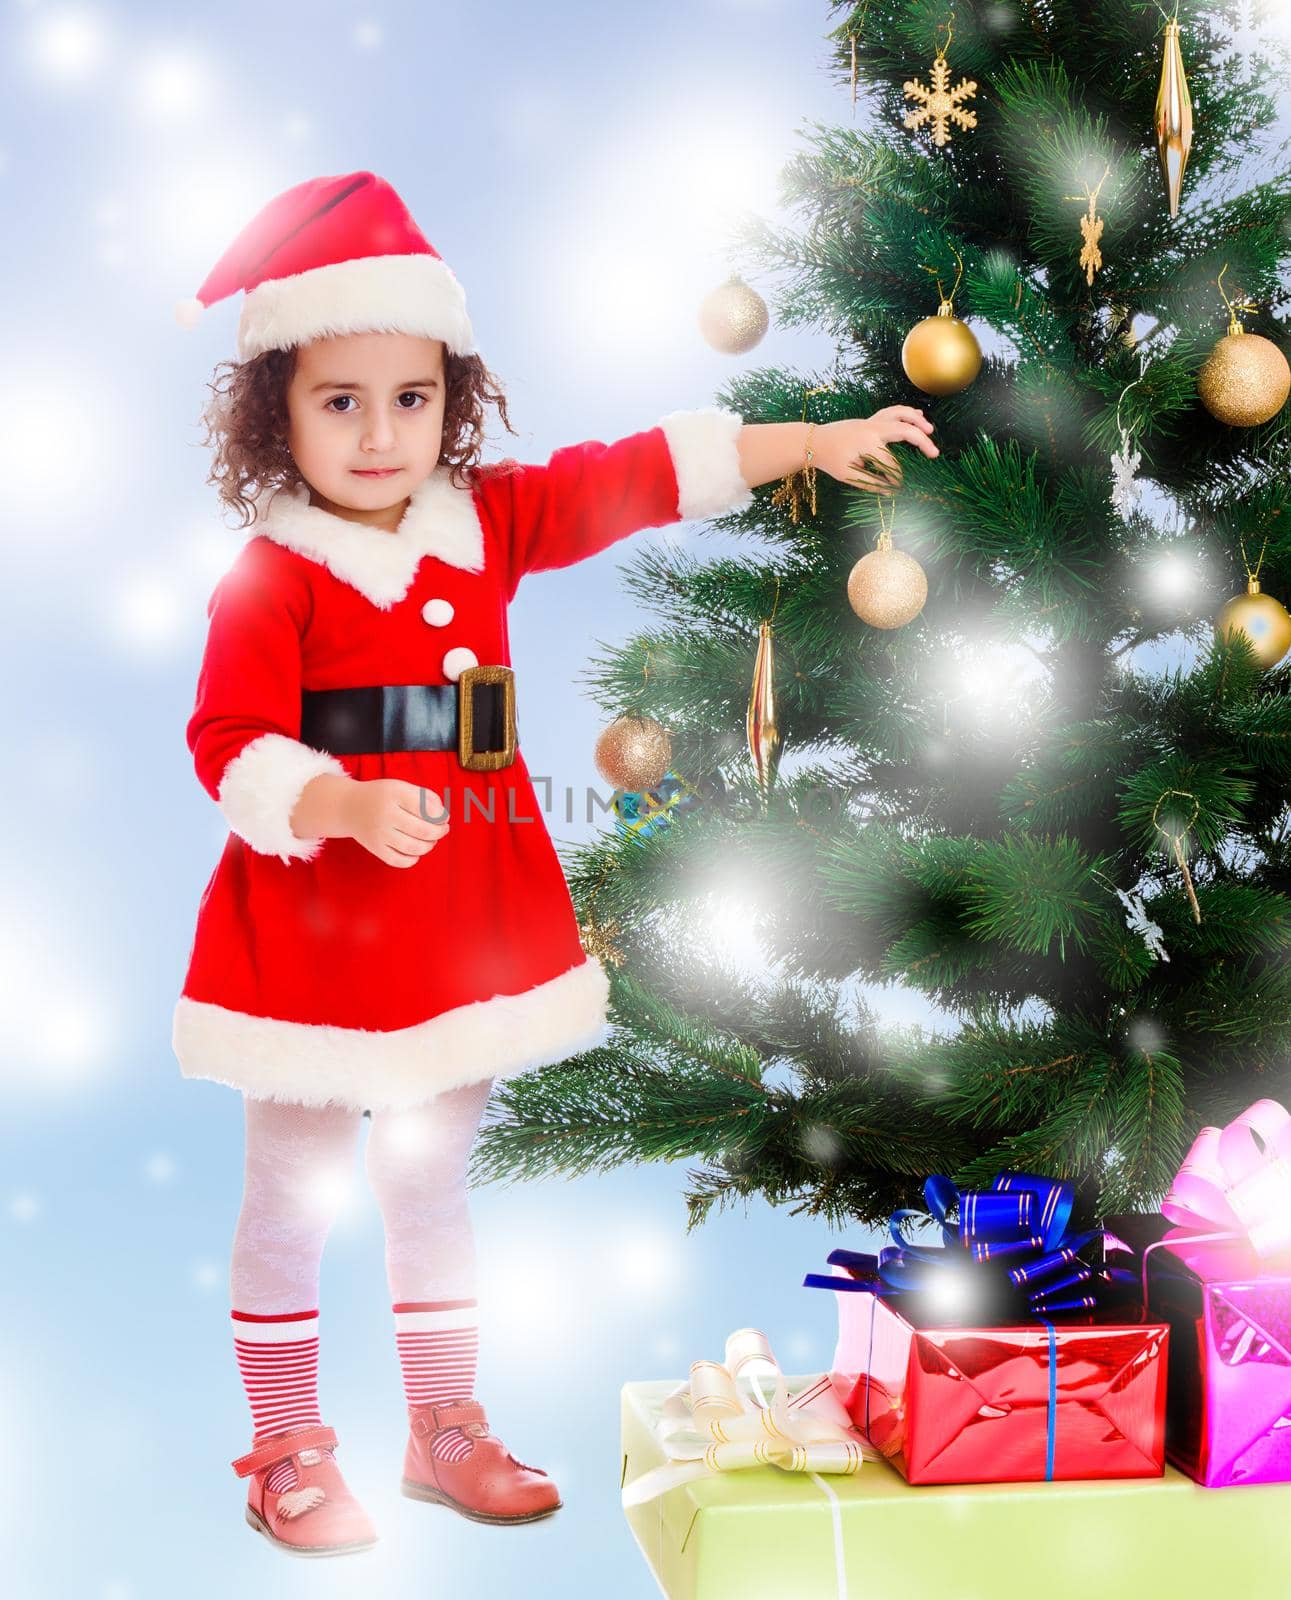 Adorable little curly-haired girl, dressed as Santa Claus decorates a Christmas tree toys.Blue winter background with white snowflakes.